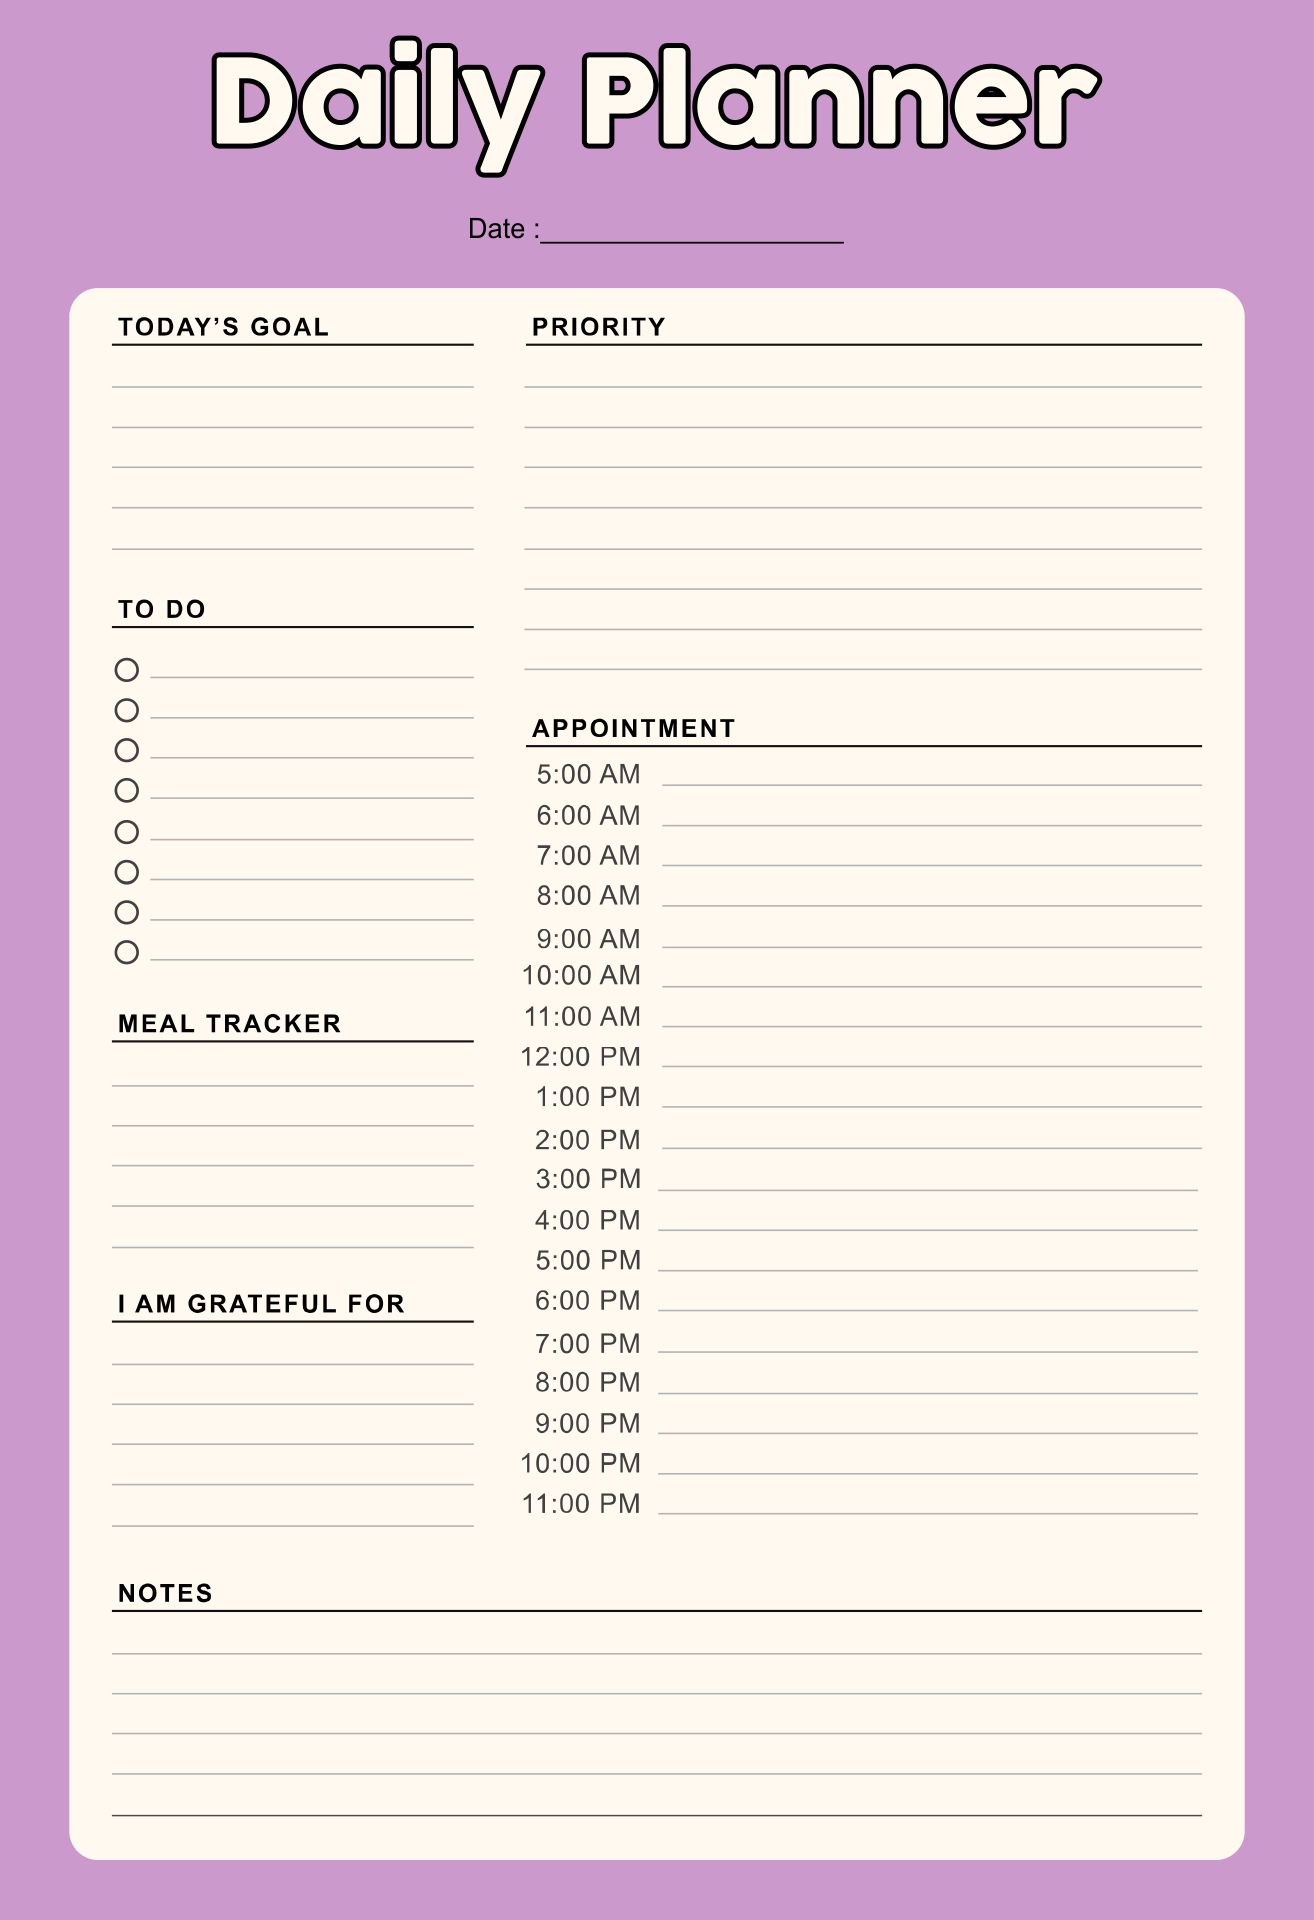 Printable Daily Planner with Times